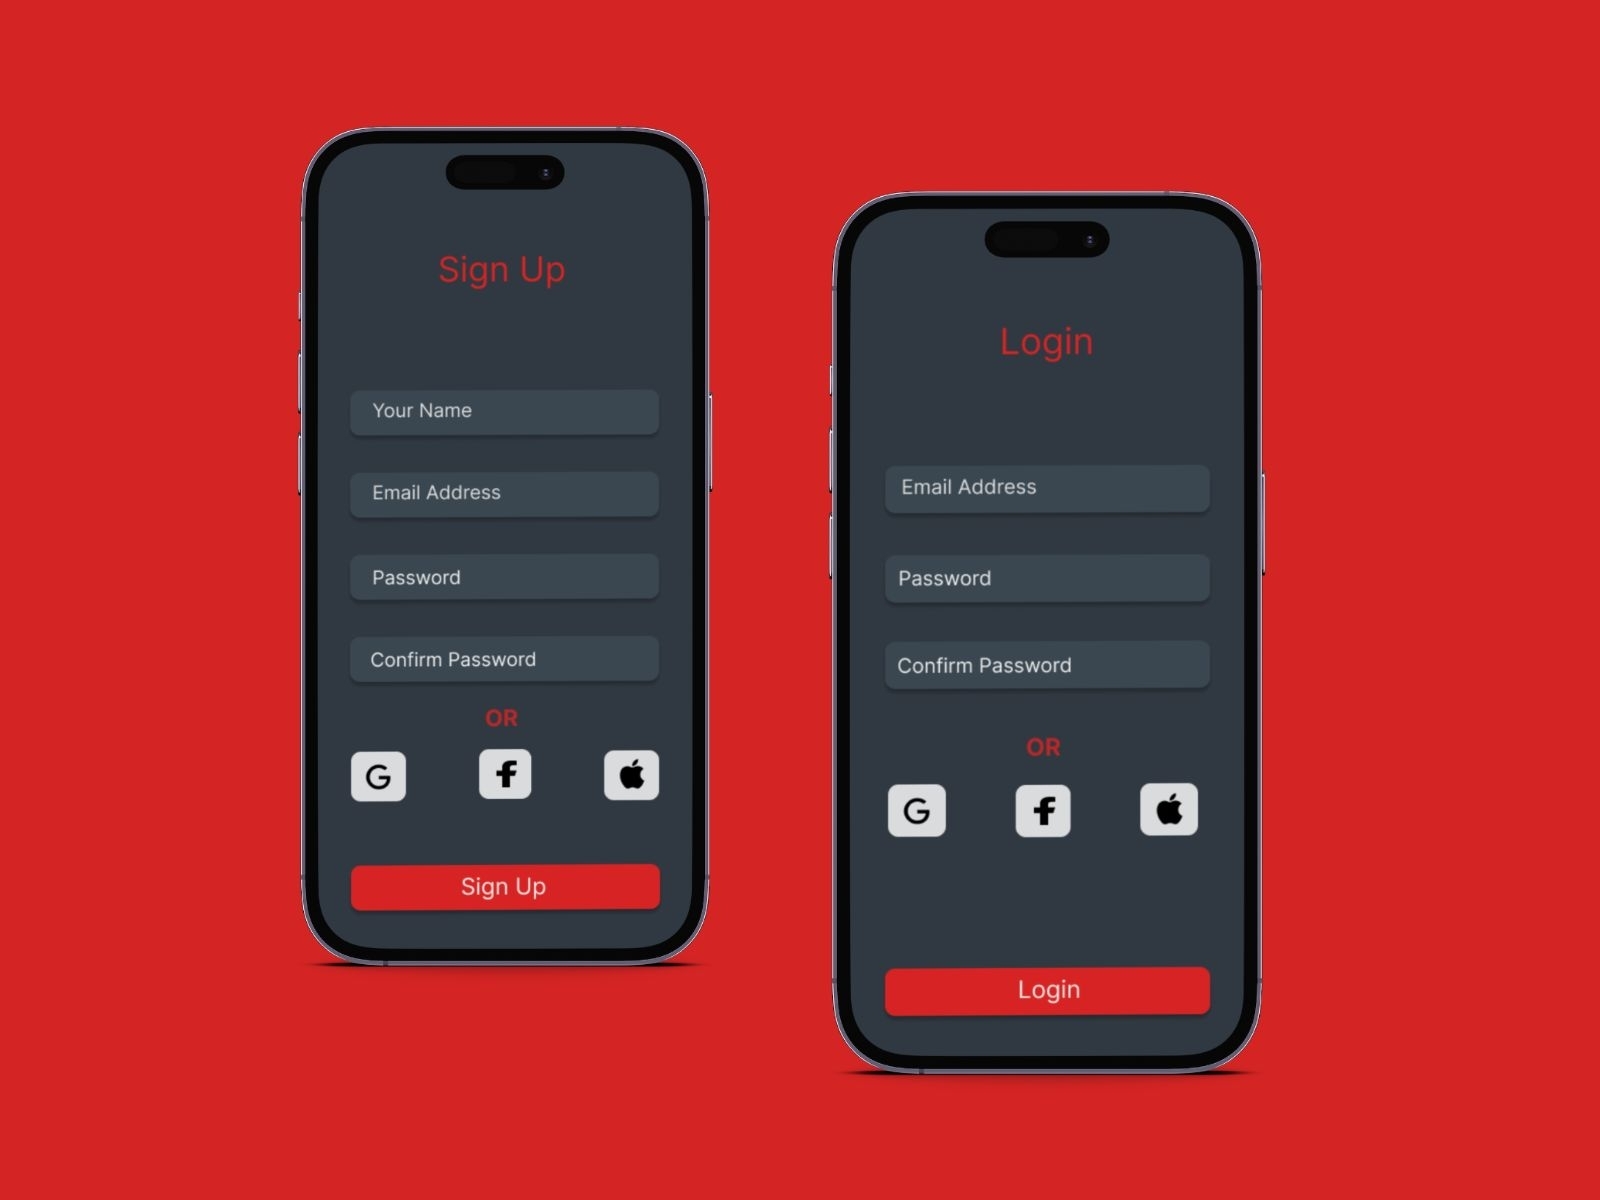 Login and Sign Up screen for mobile app by Aroin on Dribbble